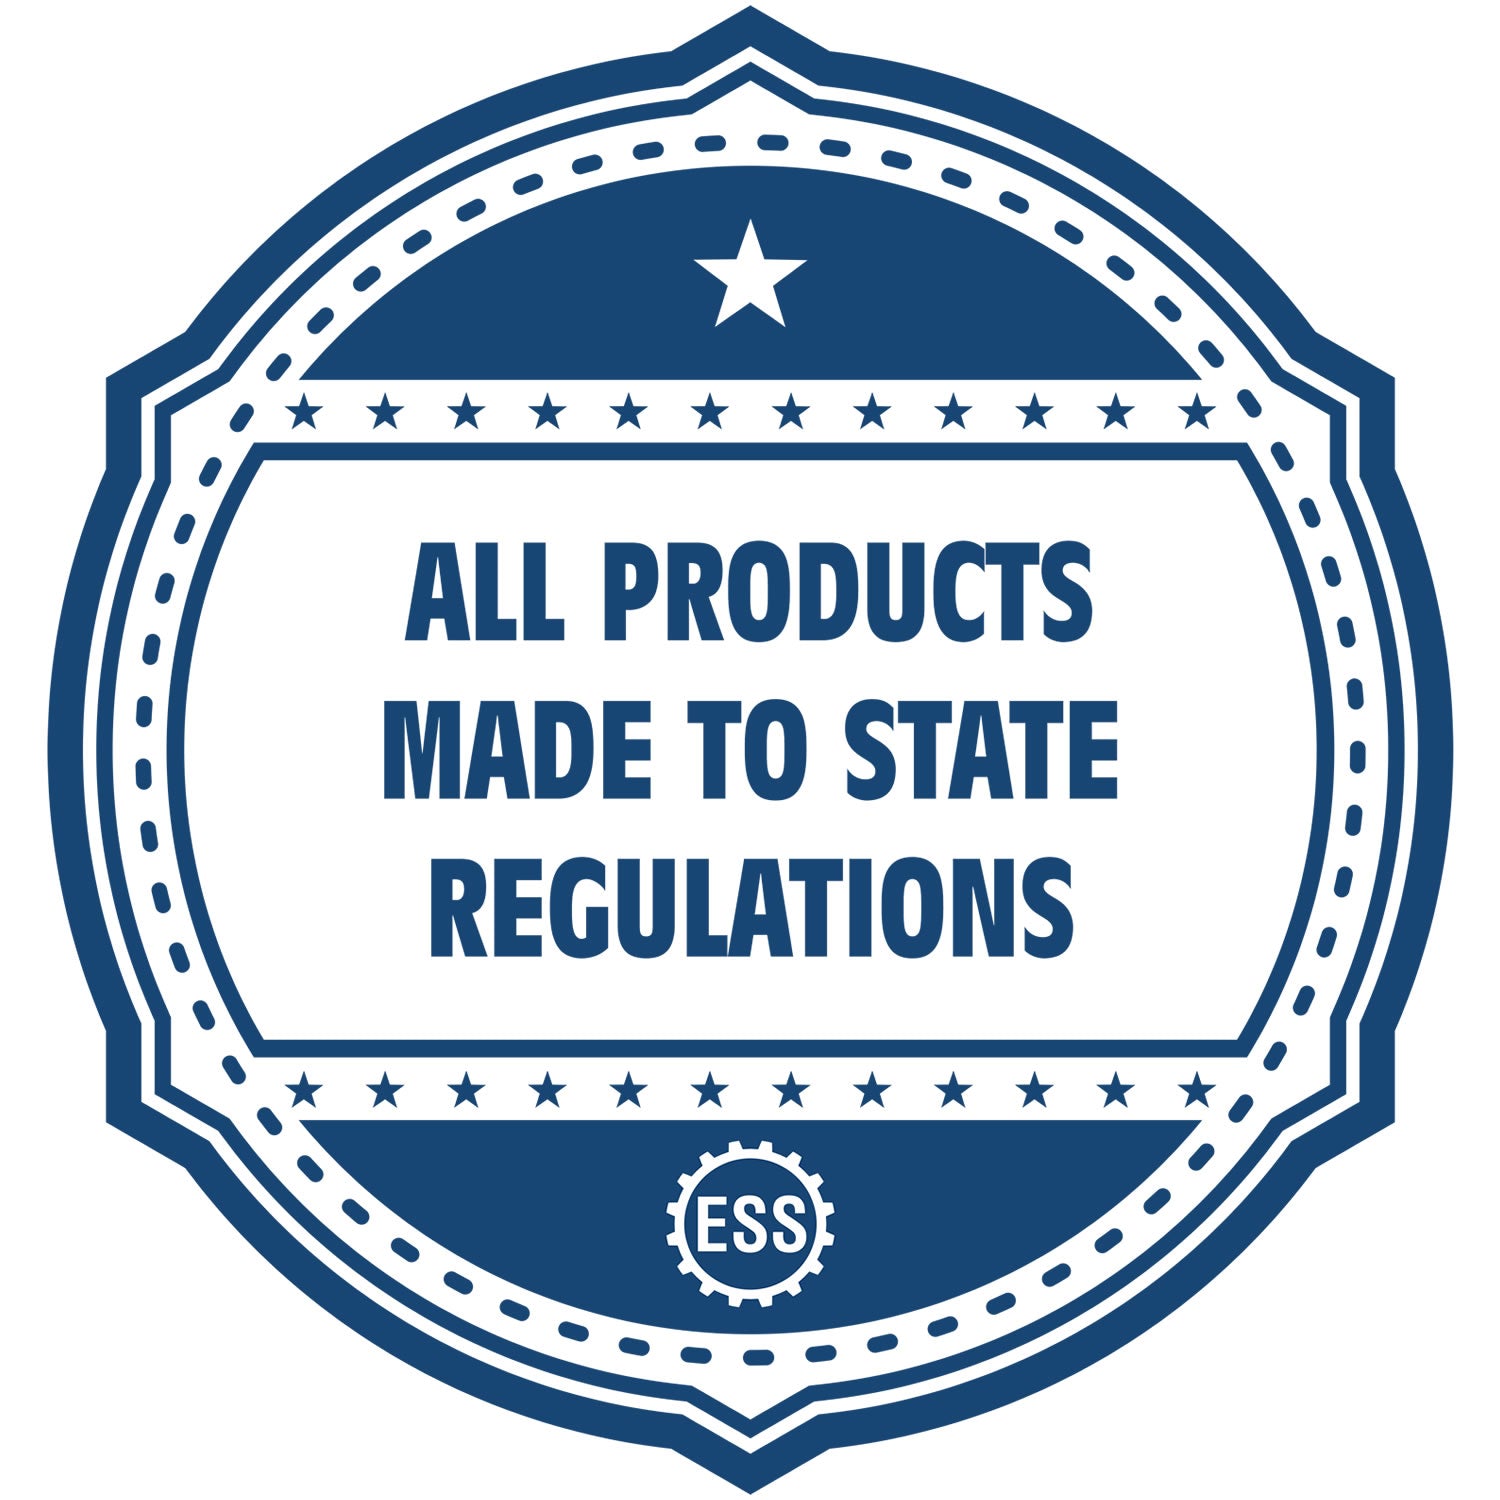 A blue icon or badge for the Mississippi Professional Geologist Seal Stamp showing that this product is made in compliance with state regulations.